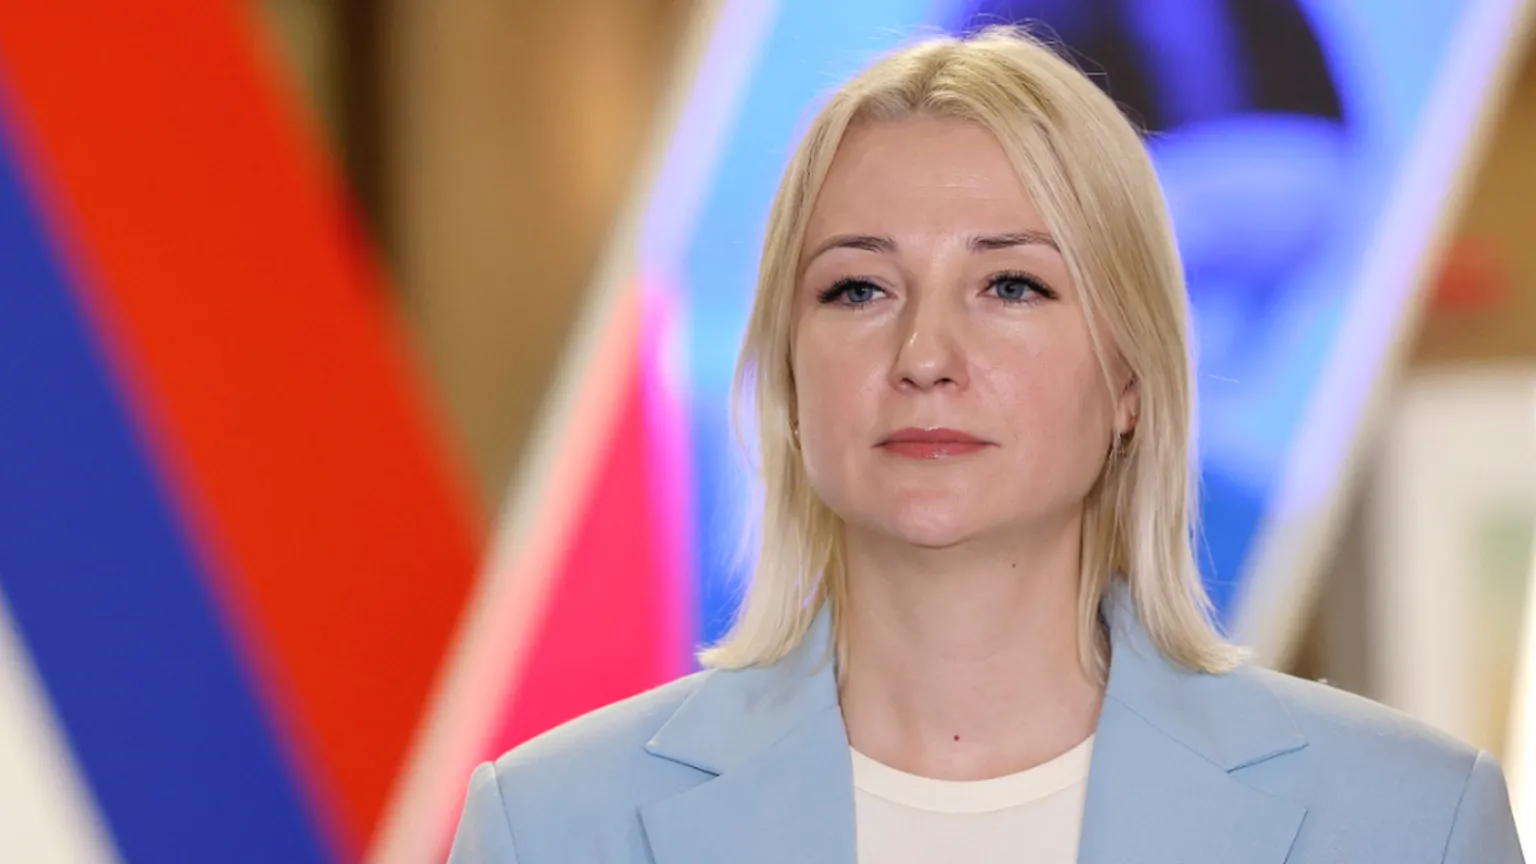 Russia bans anti-war candidate from challenging Putin (bbc.com)